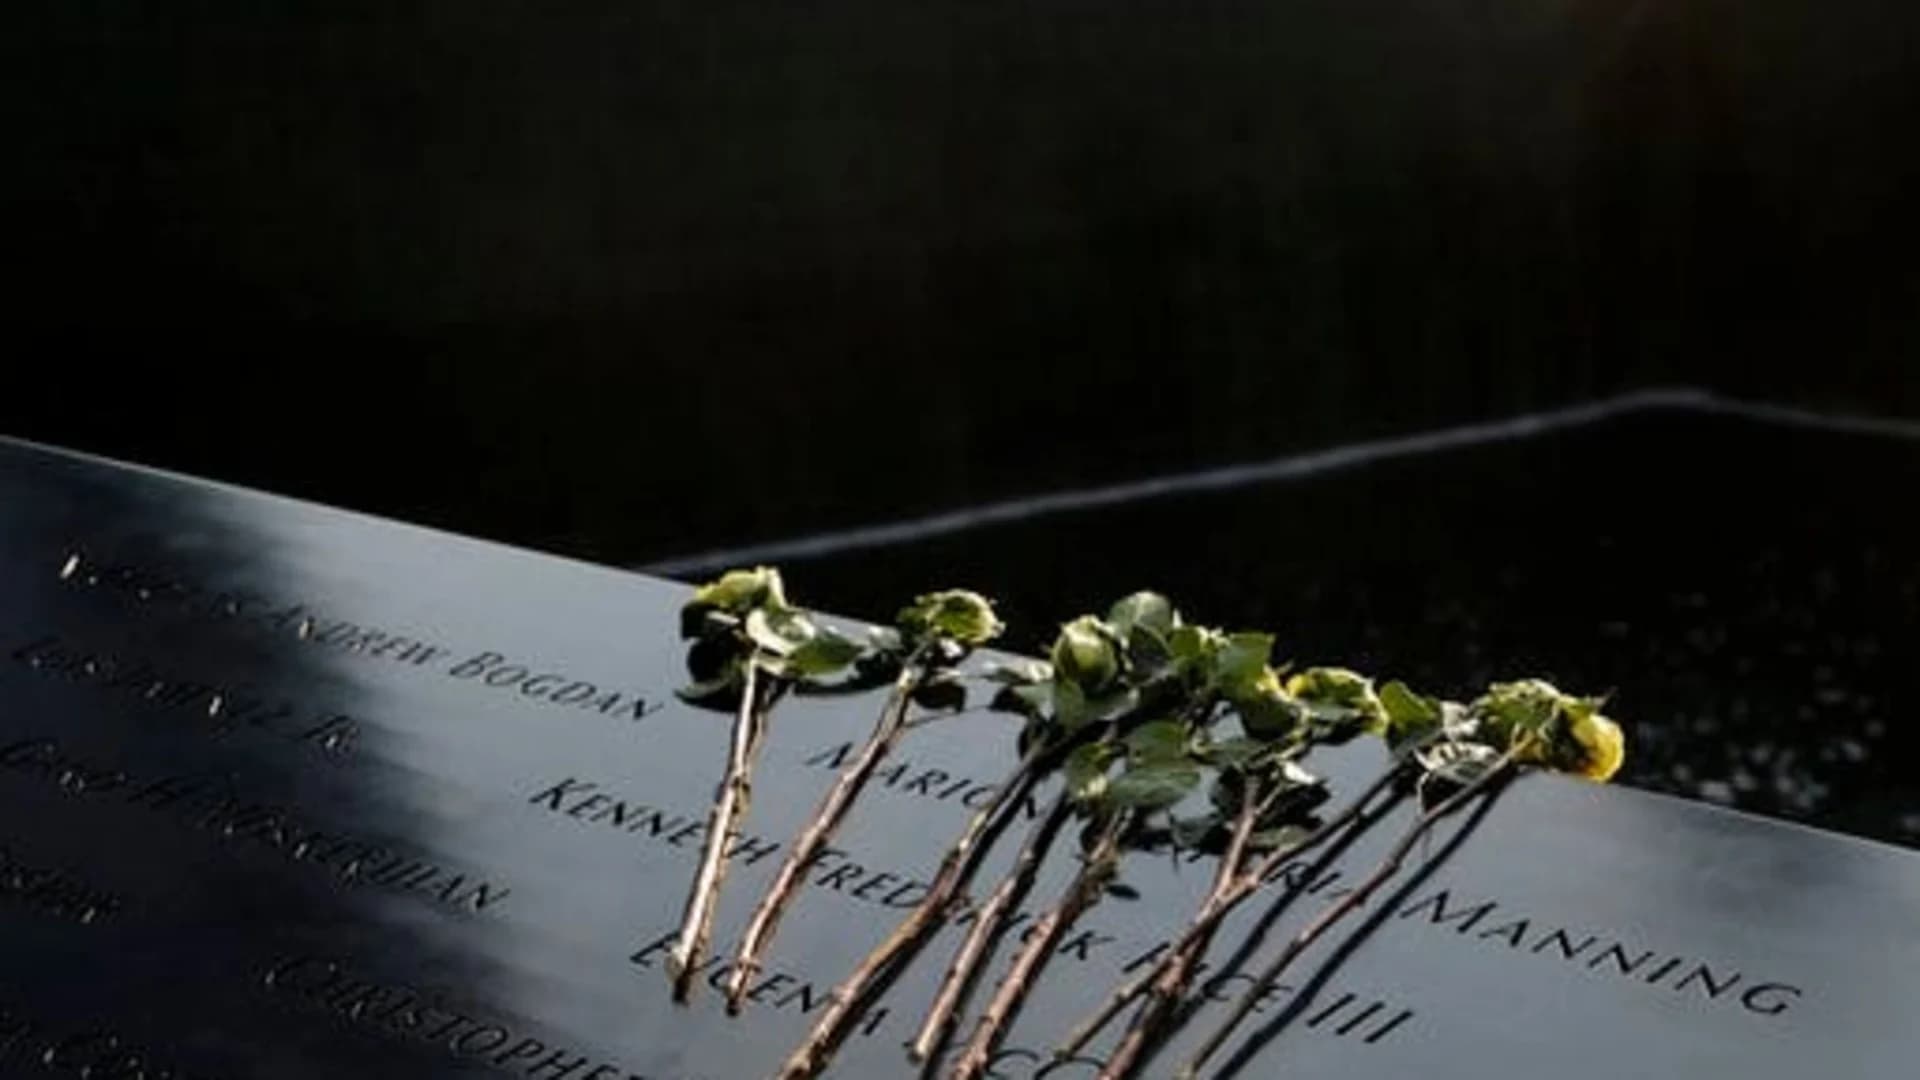 Sept. 11 victims remembered at Ground Zero ceremony - LIVE VIDEO